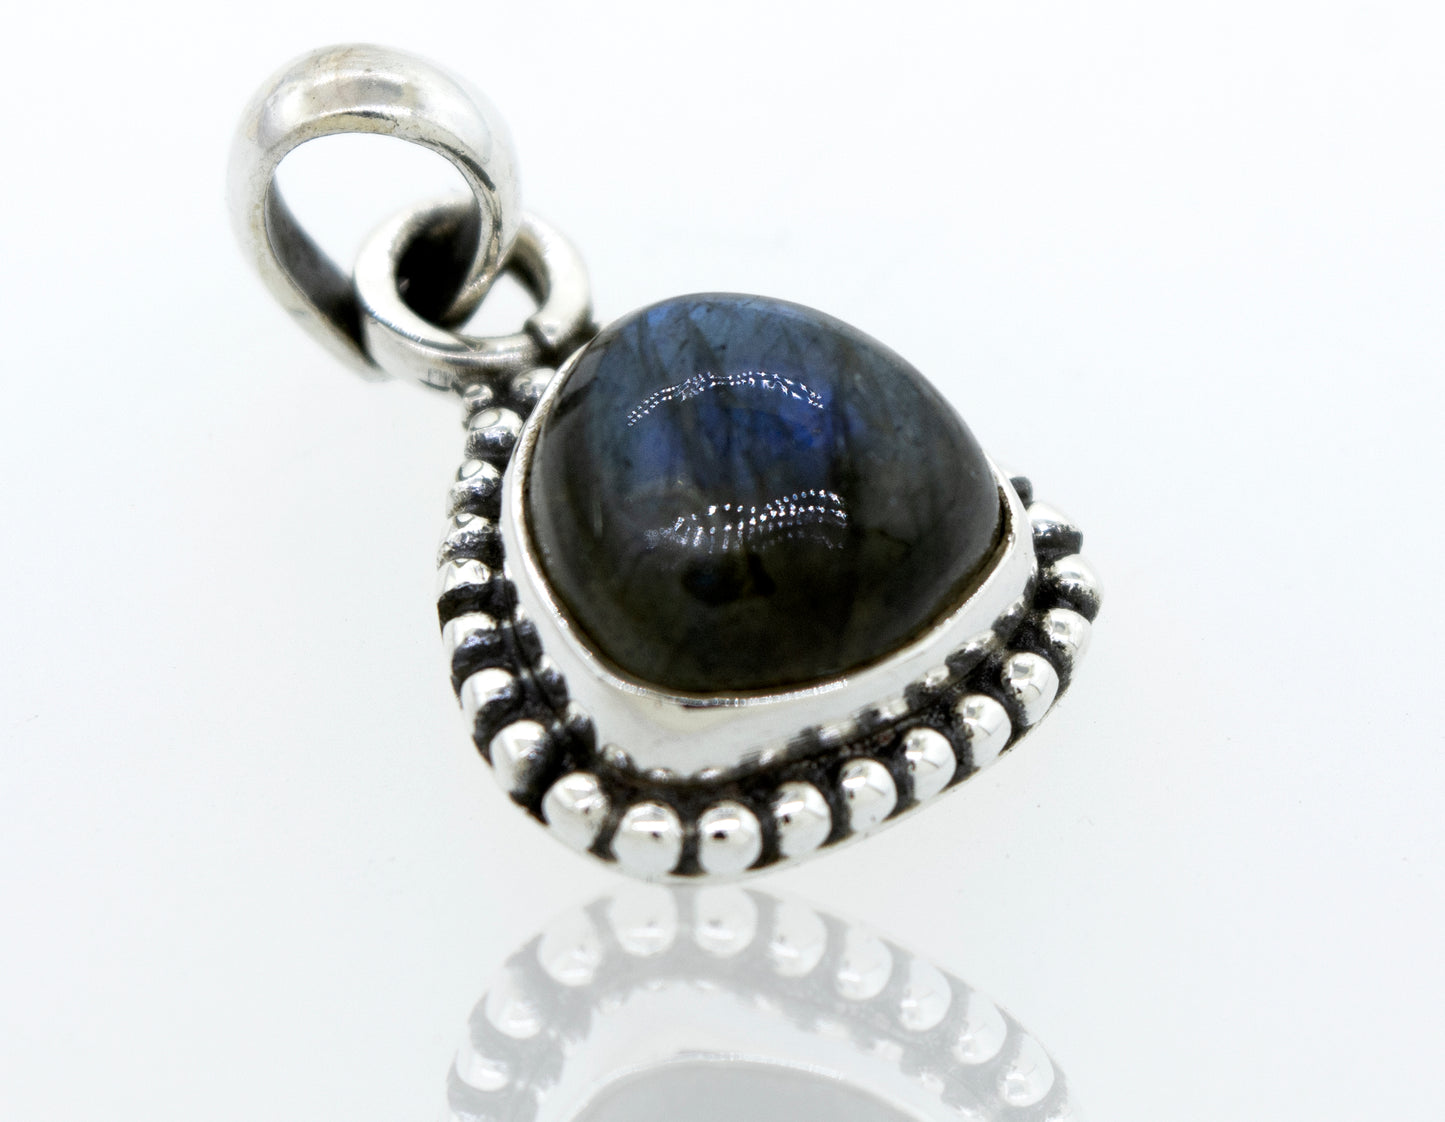 A Beautiful Triangular Shape Labradorite Pendant With Beads Design made of sterling silver by Super Silver.